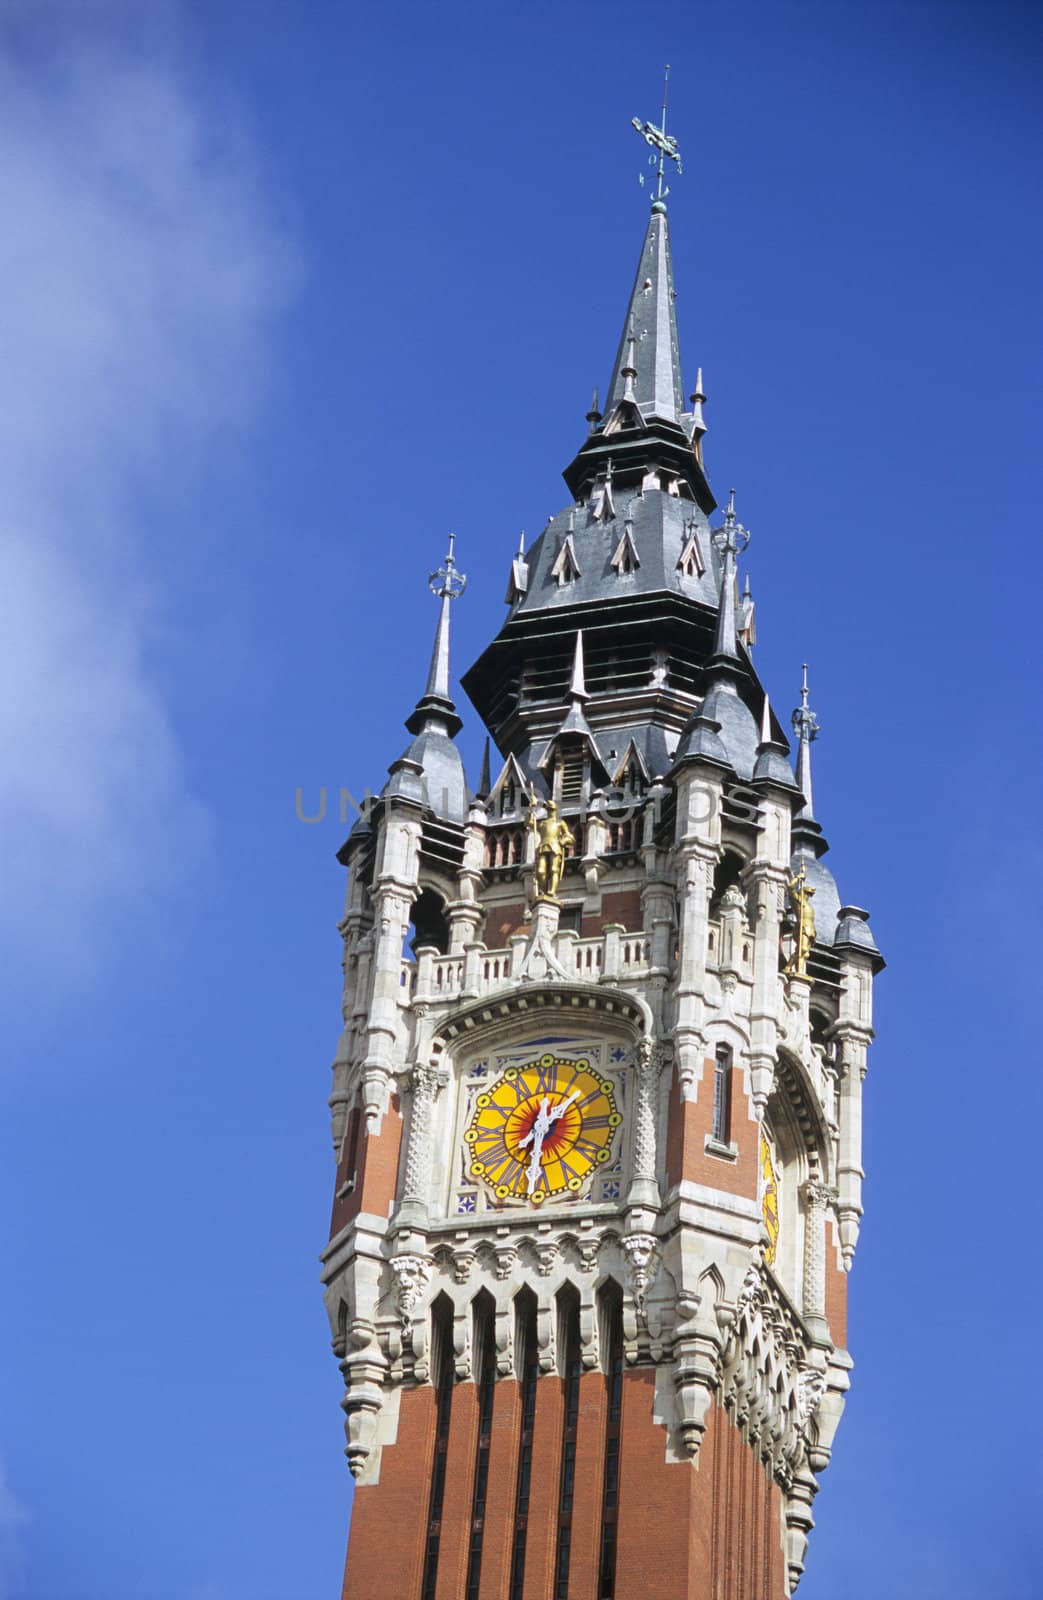 Detail of the colourful clock tower of the town hall building in Calais, France.